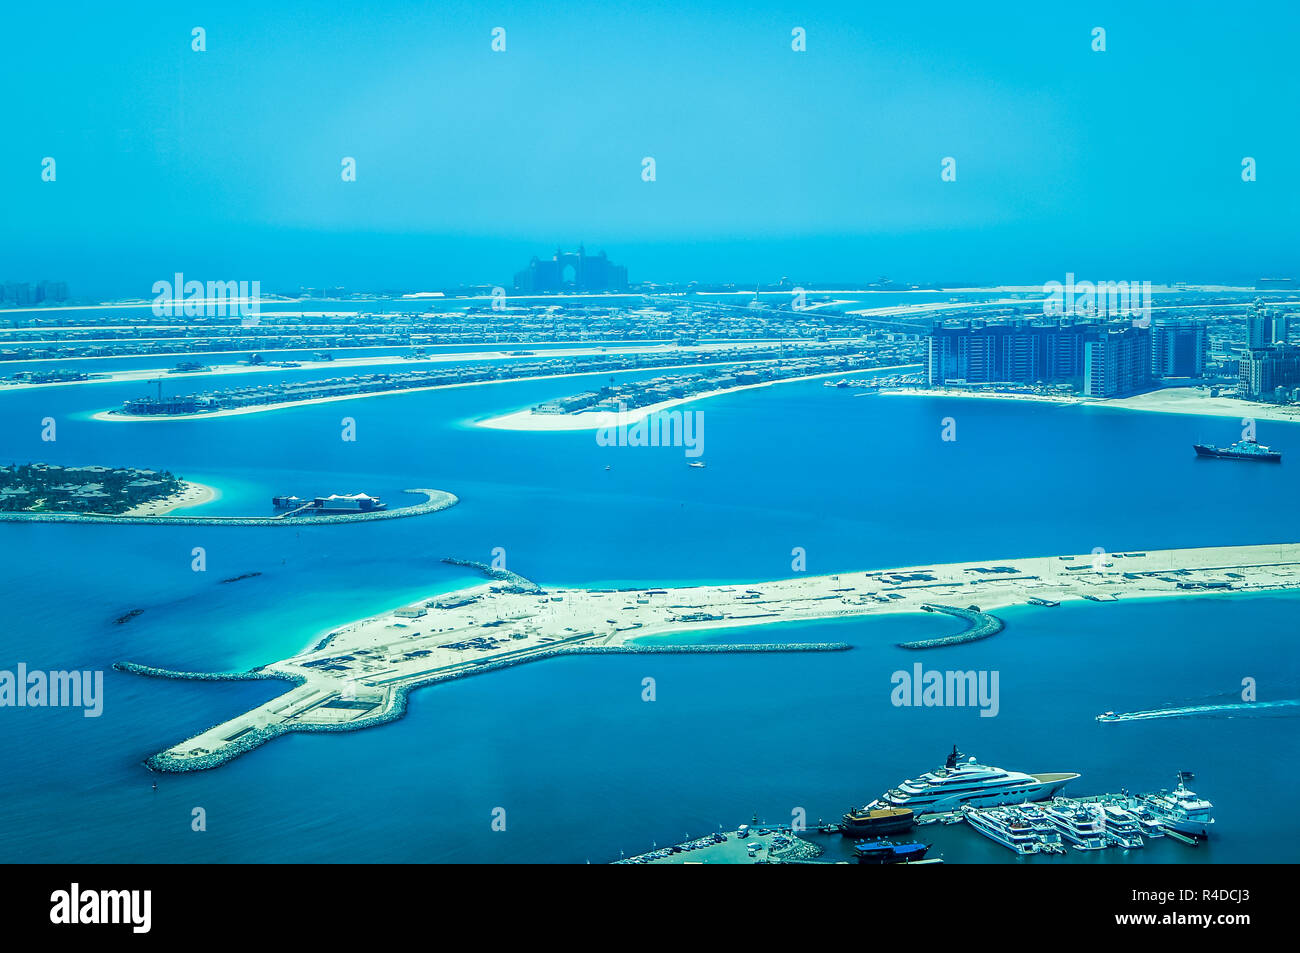 Aerial view of Palm Jumeirah Island with luxury yachts in the front. Development of Dubai. Stock Photo